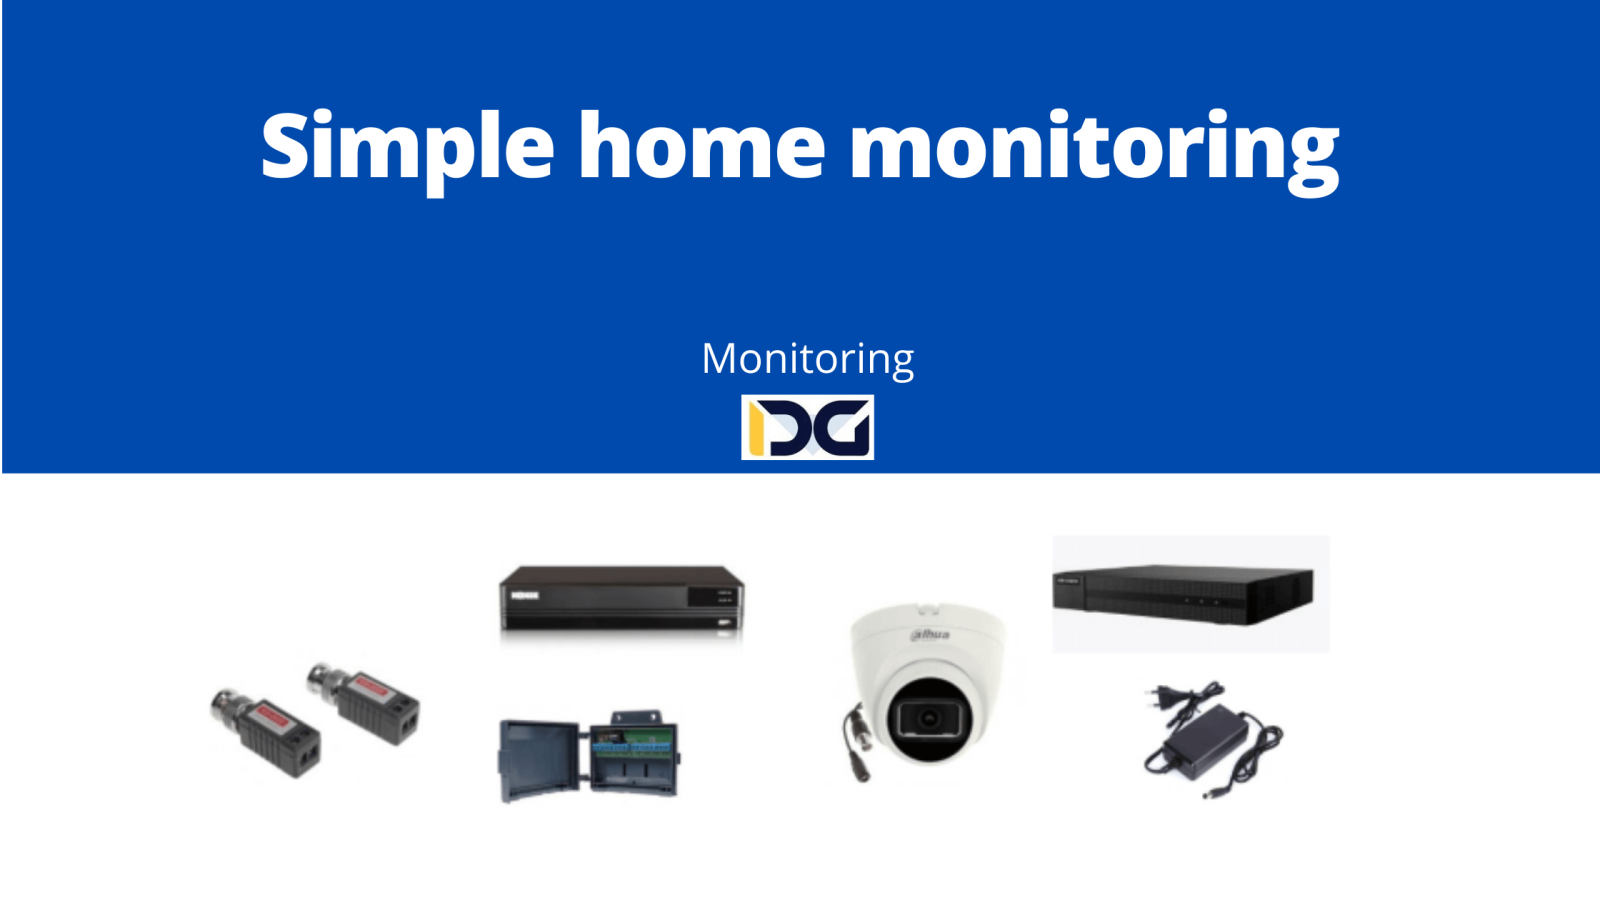 Simple home monitoring: selection, installation, and configuration